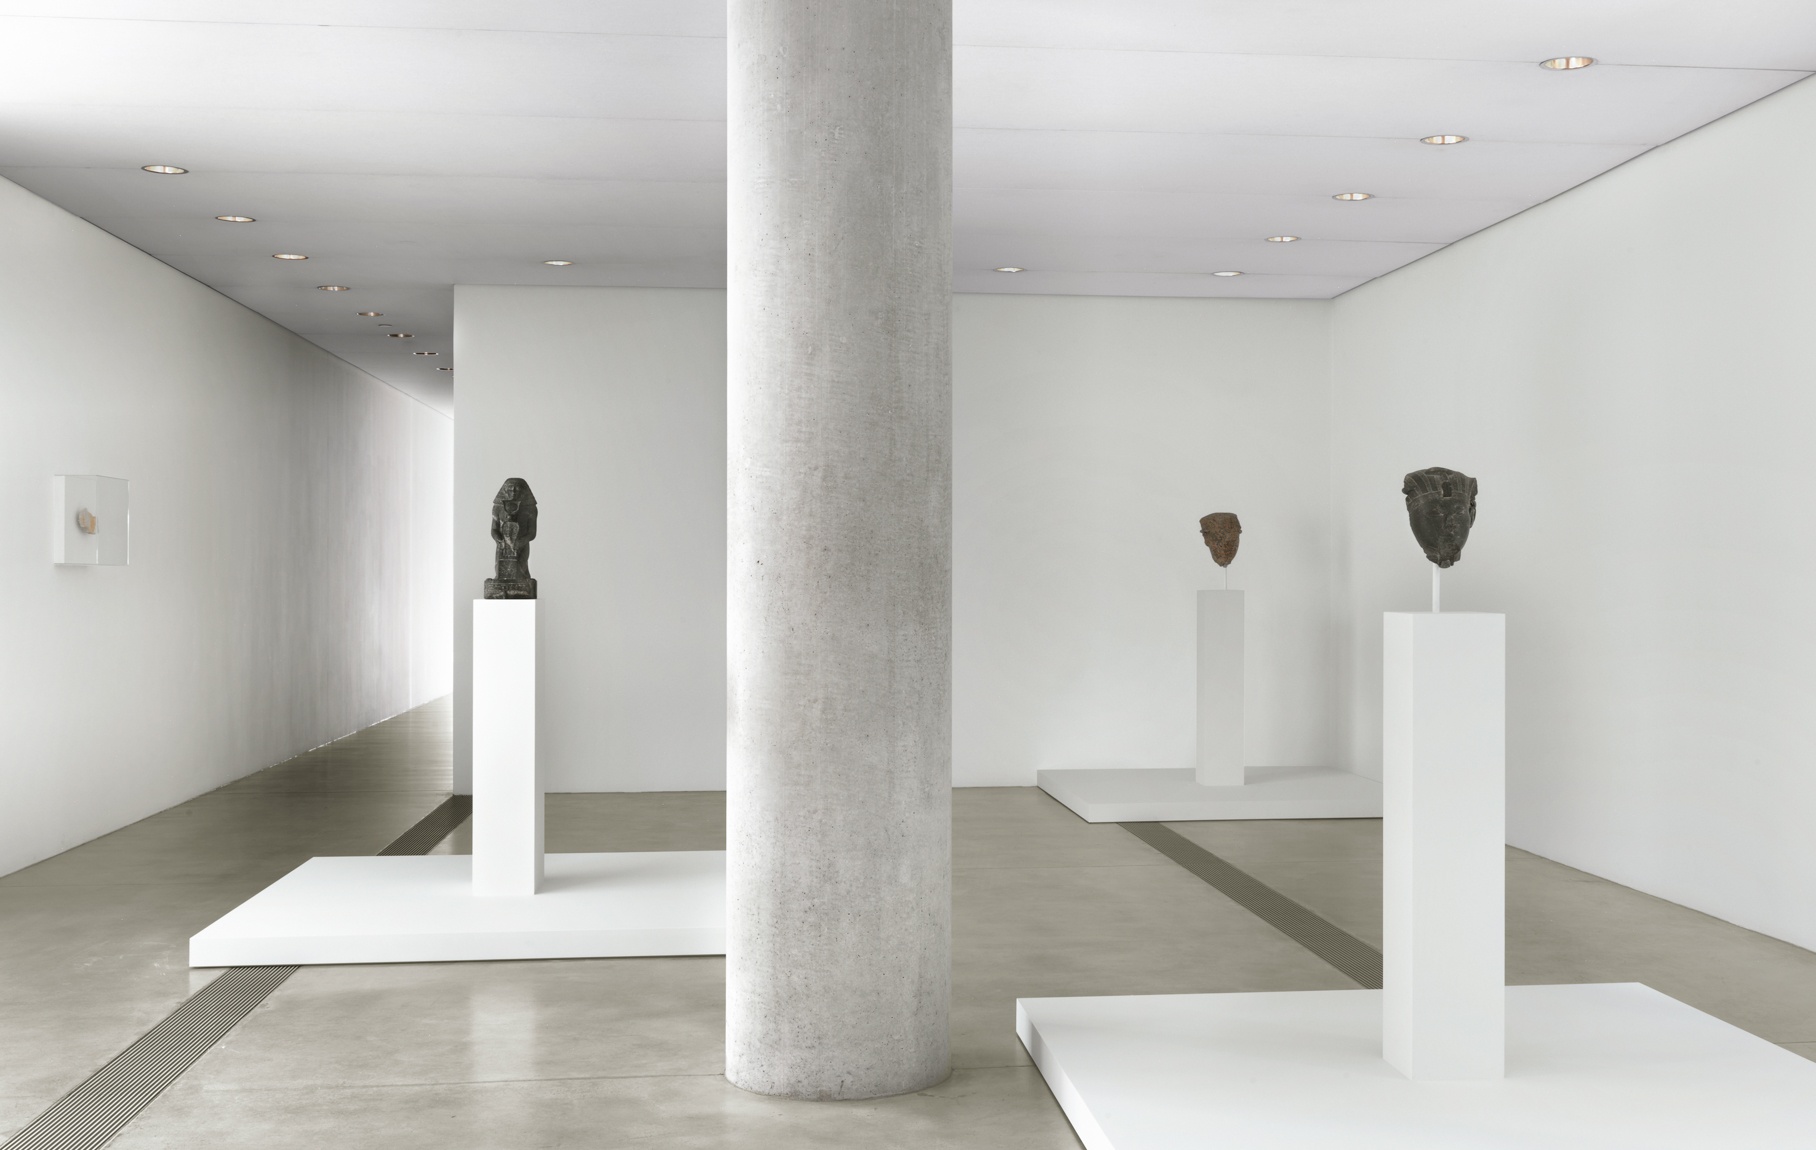 A view of stone sculptures on pedestals in the Entrance Gallery.